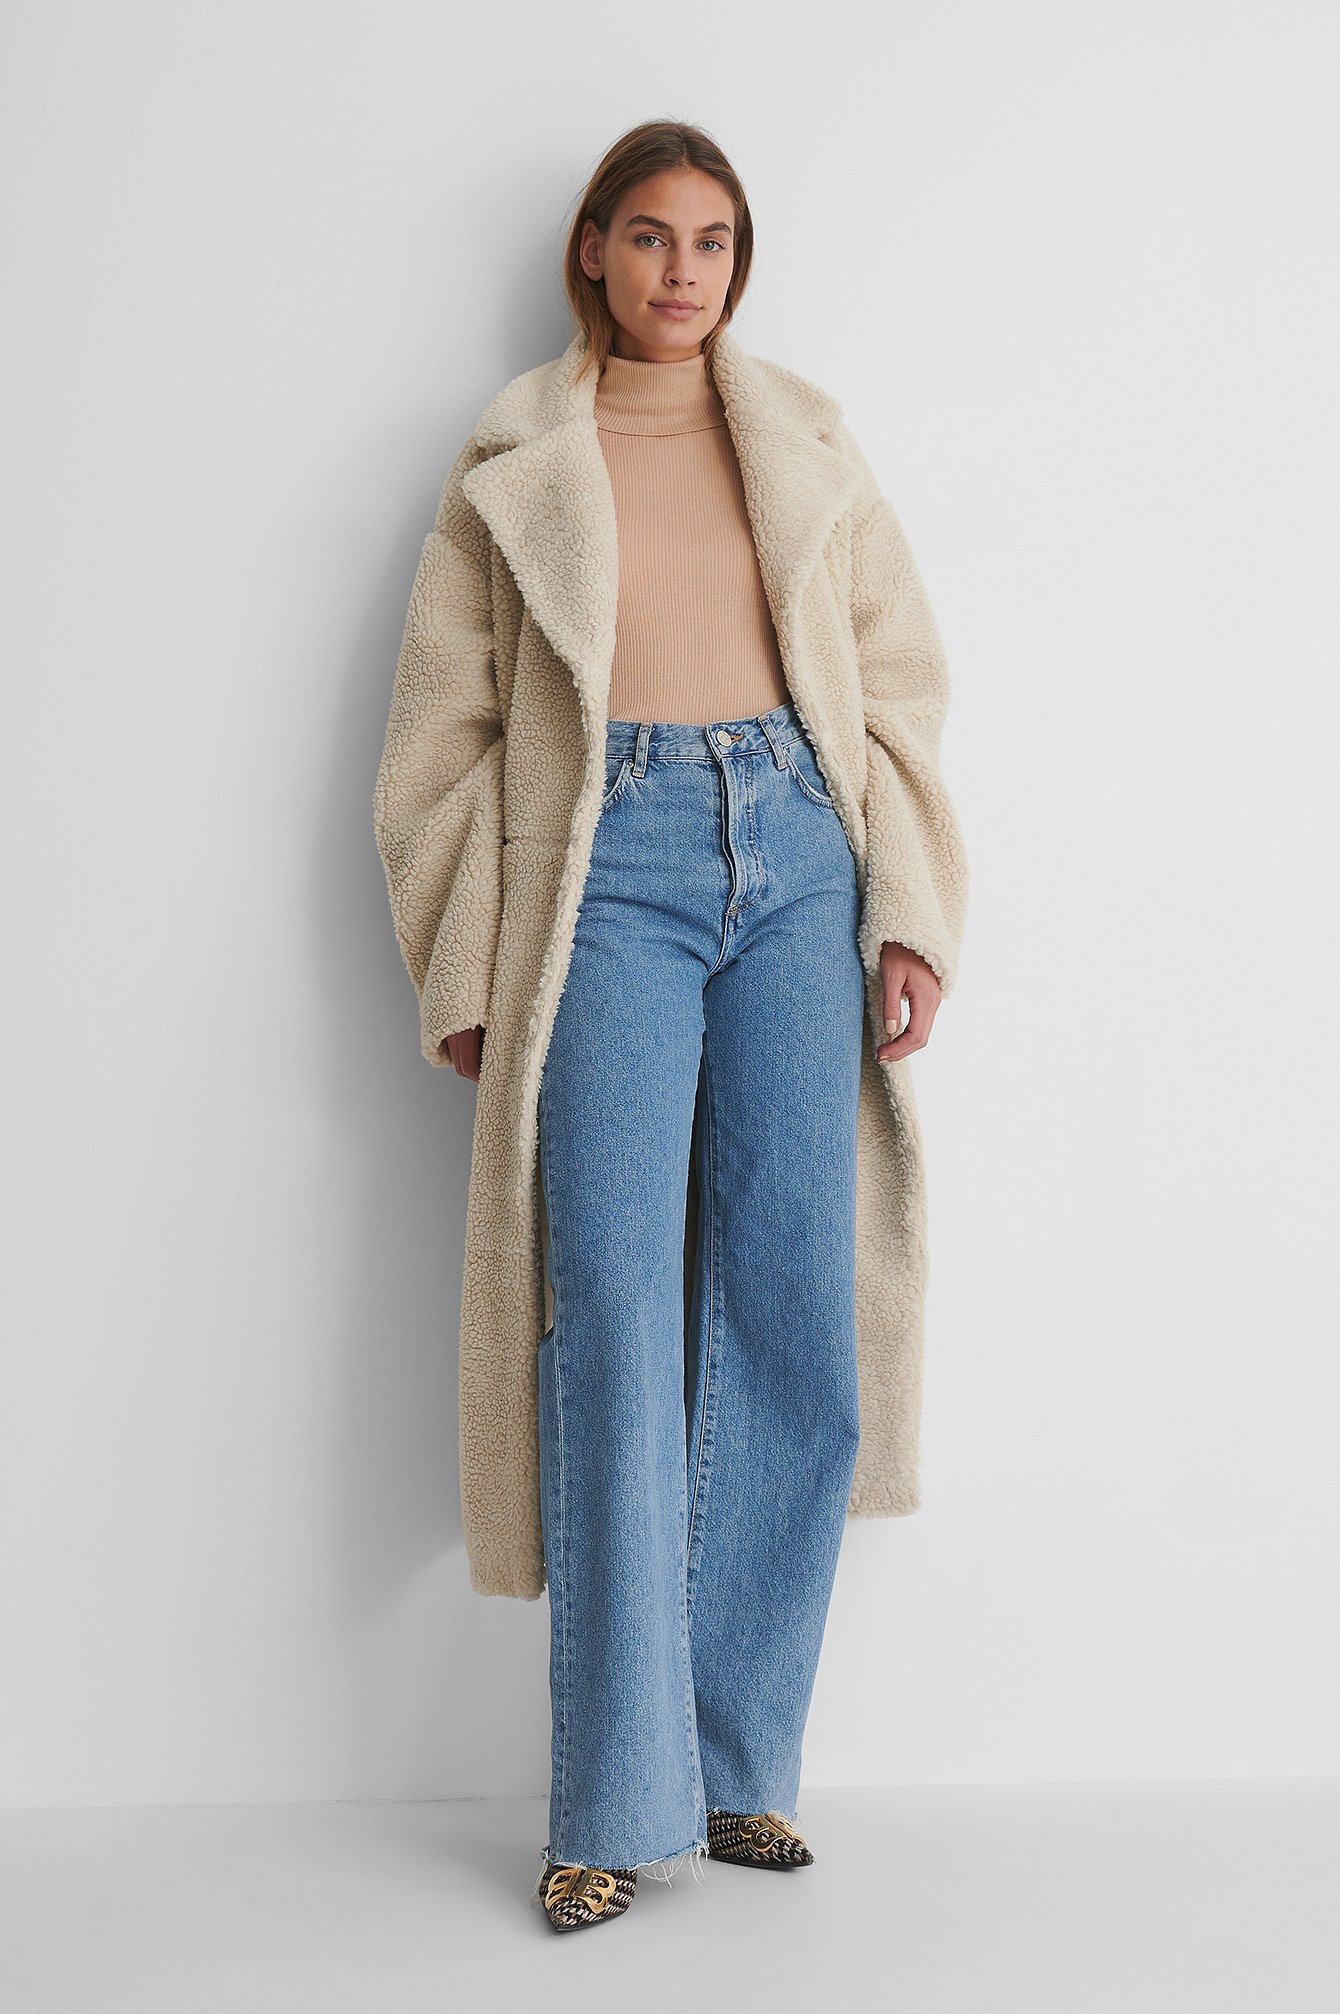 Pure Wool High Neck Knitted Sweater with Wide Denim and a Teddy Coat.